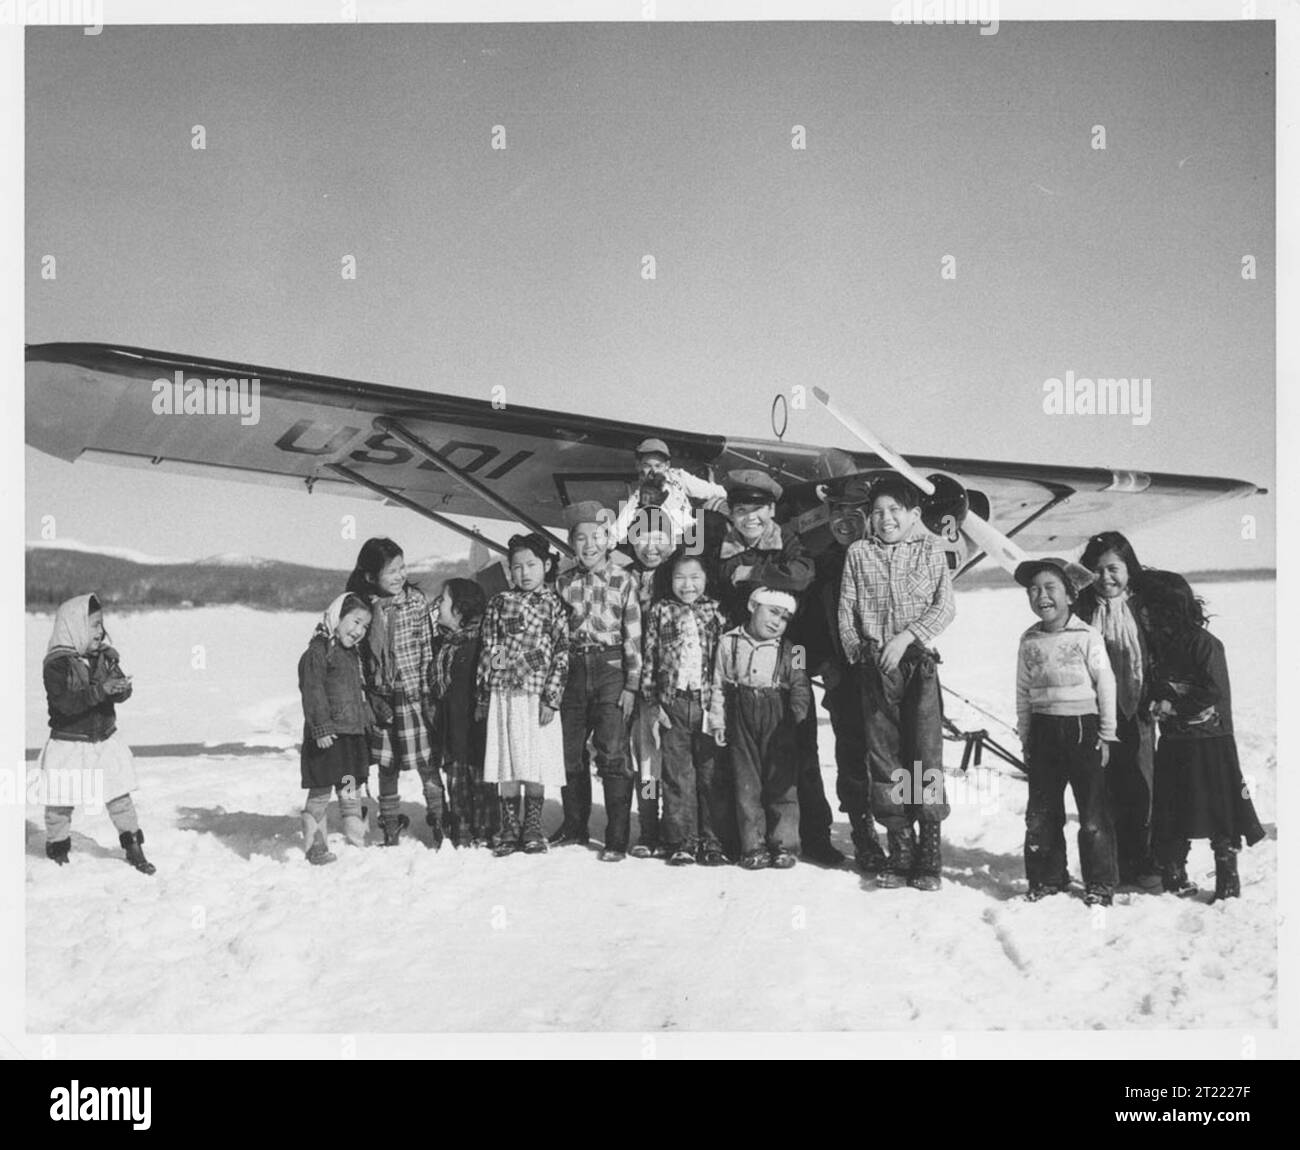 Children in front of small plane on skiis. The village of Kaltag is located on the Yukon River. Subjects: Jim King Collection; Yukon River; Native Americans; Transportation; Aircraft; Aircraft; Alaska.  . 1998 - 2011. Stock Photo